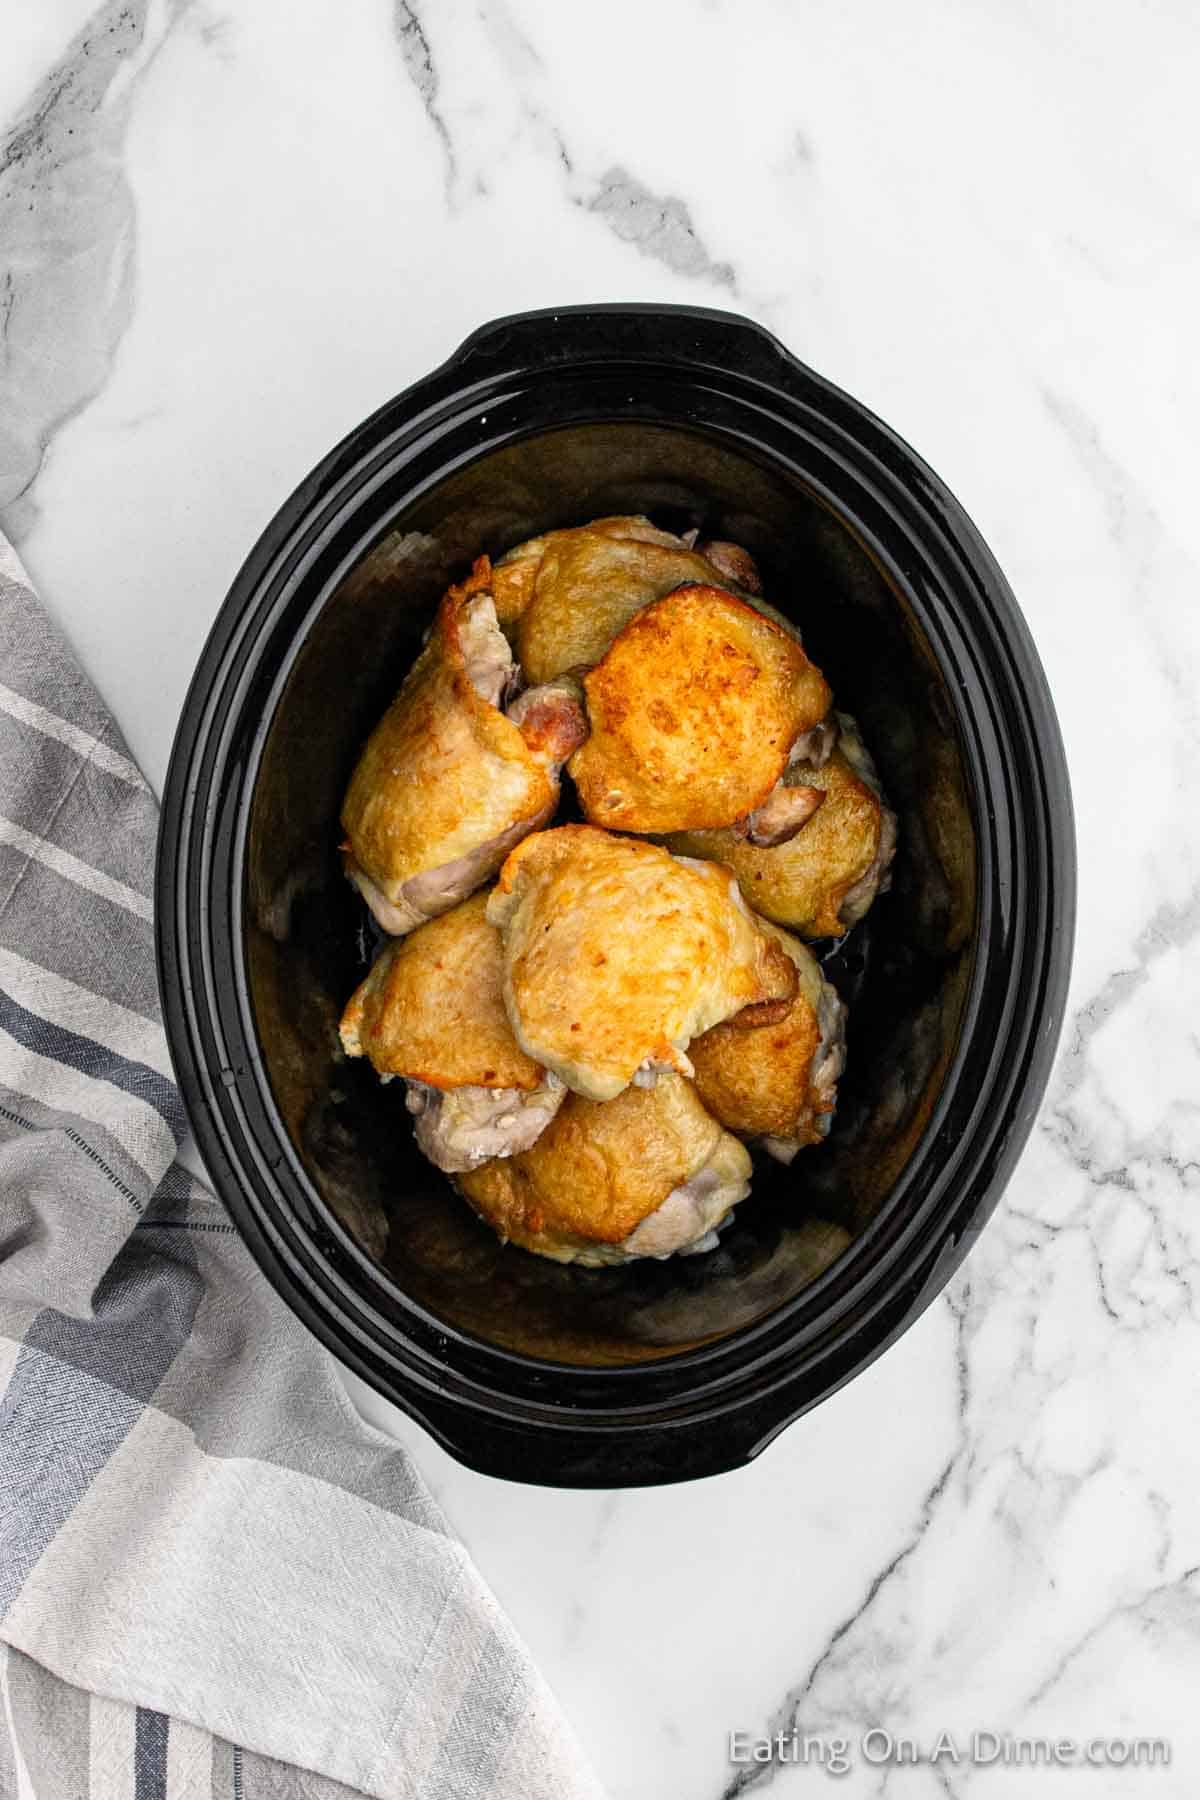 Placing chicken thighs in slow cooker